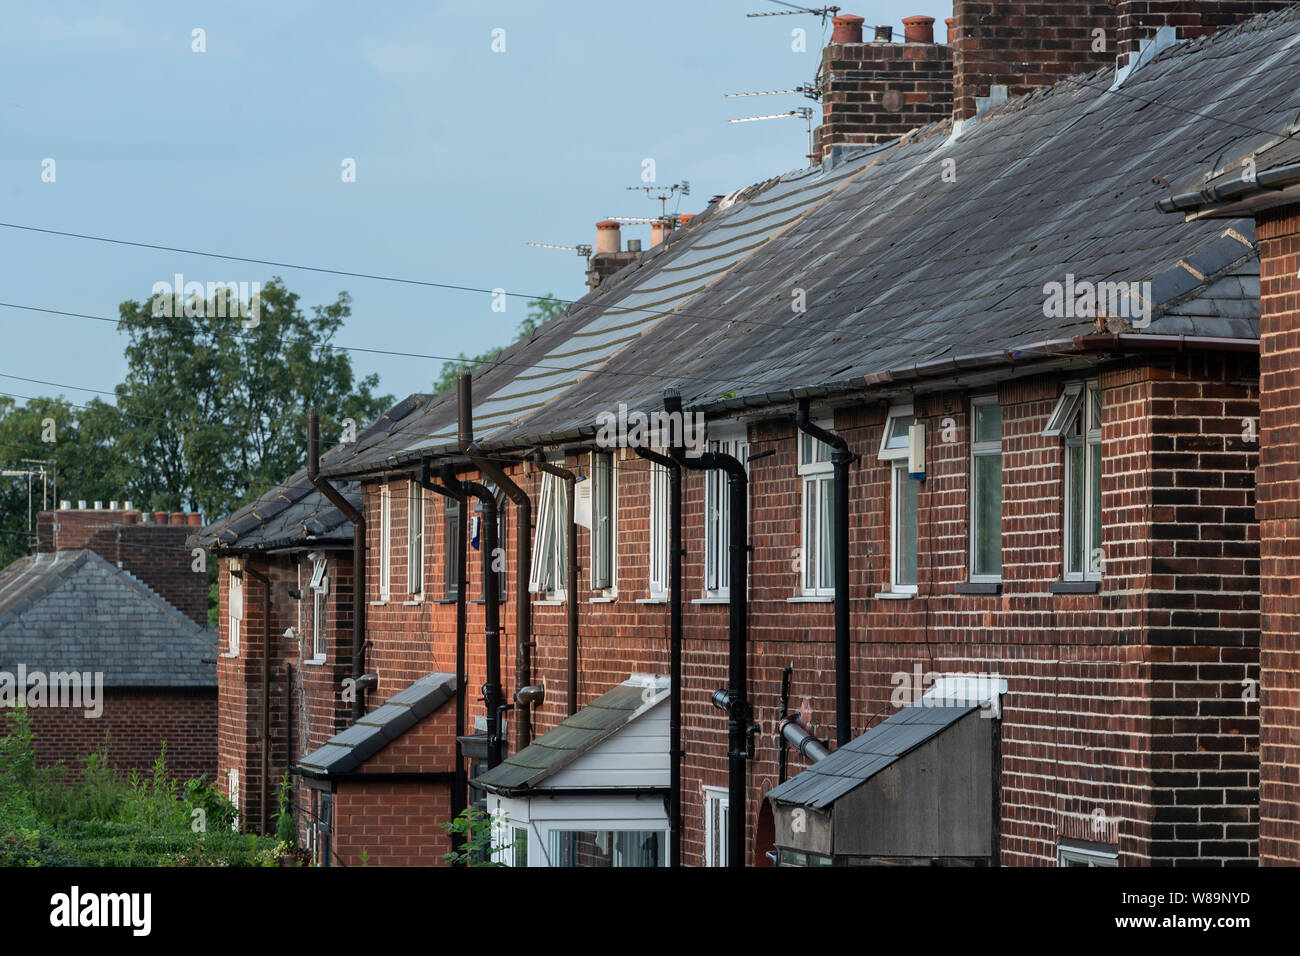 An example of housing in the Wythenshawe area of south Manchester (Editorial use only). Stock Photo